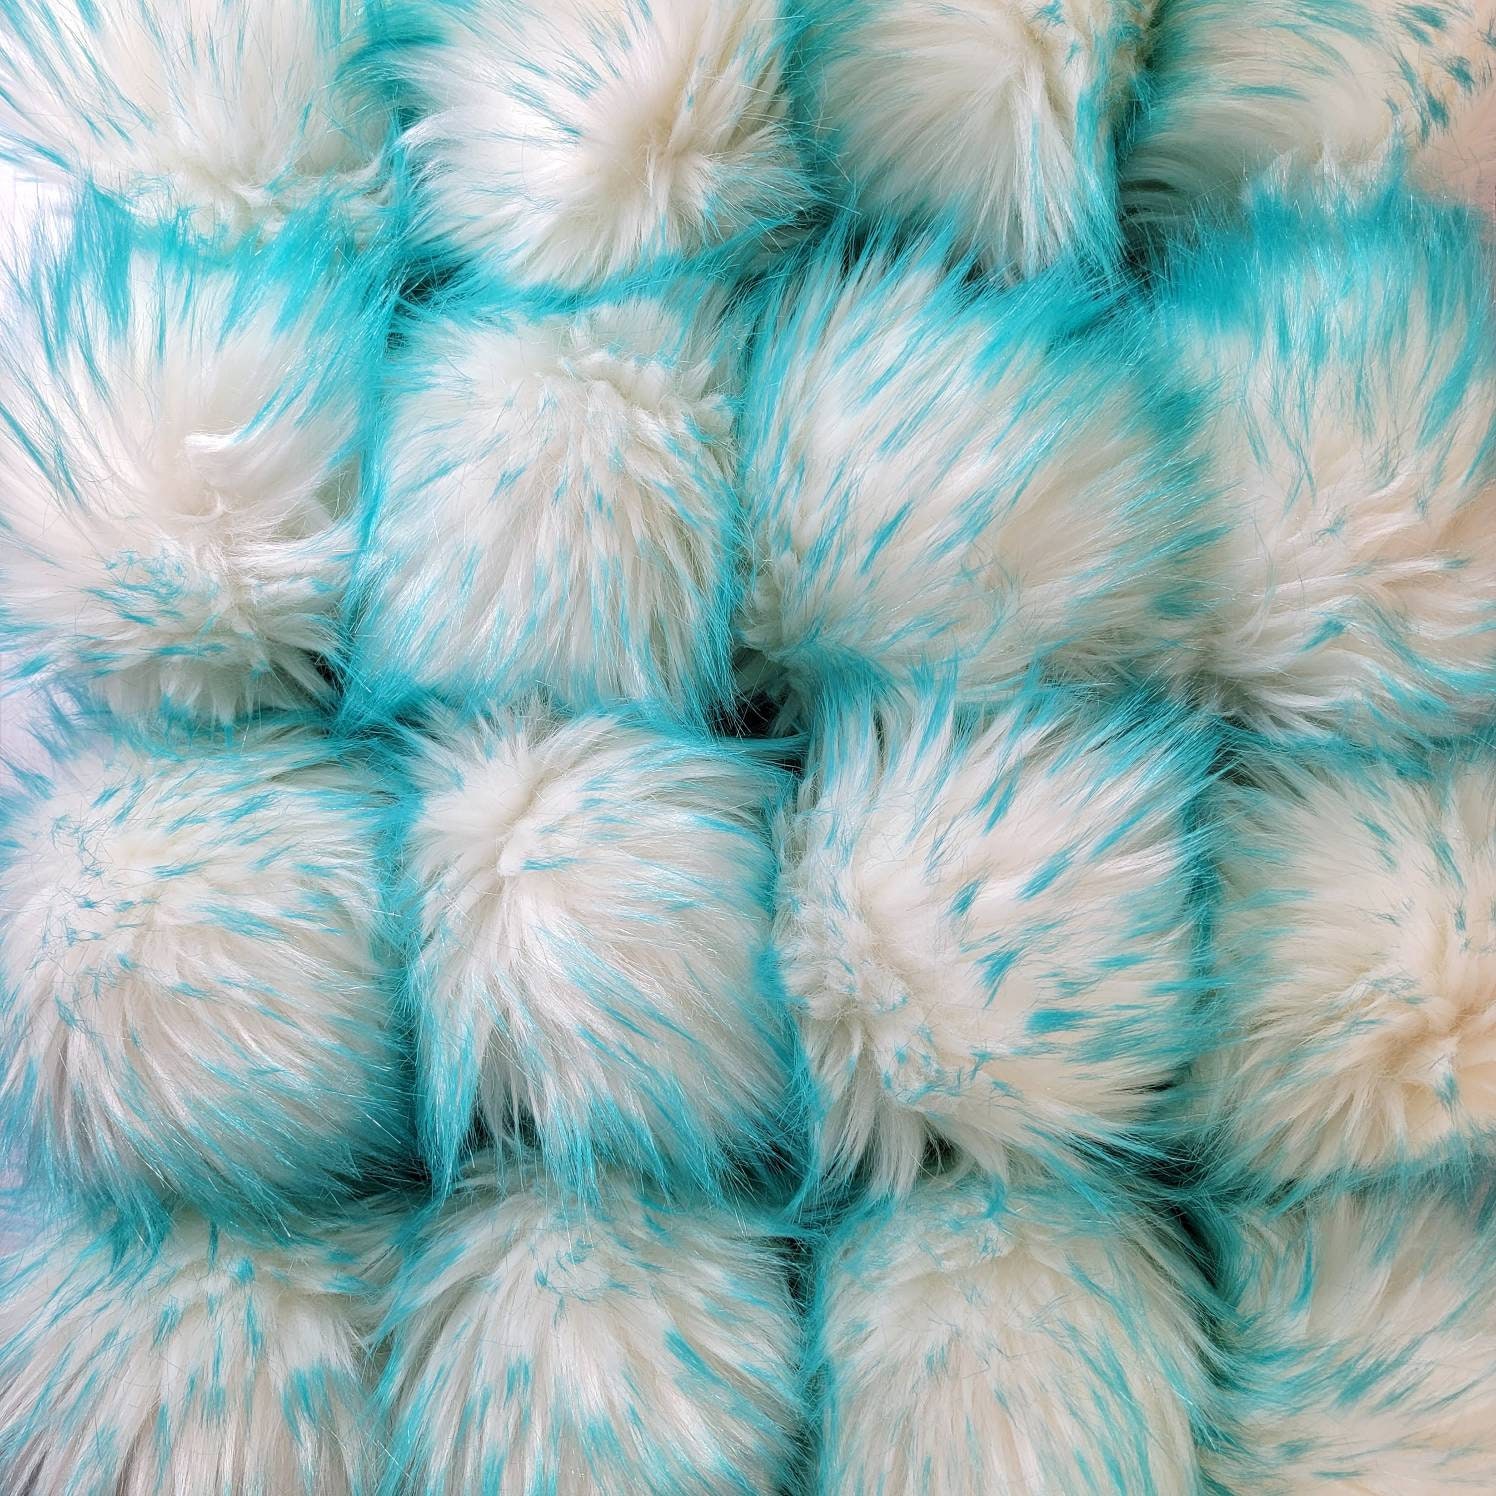 AQUA POP Faux Fur Poms, Frosted Poms, Tipped Poms, Faux Fur Poms, Luxury  Poms, Pom Poms, Fur Poms, Poms for Hats, Crochet and Knitting 